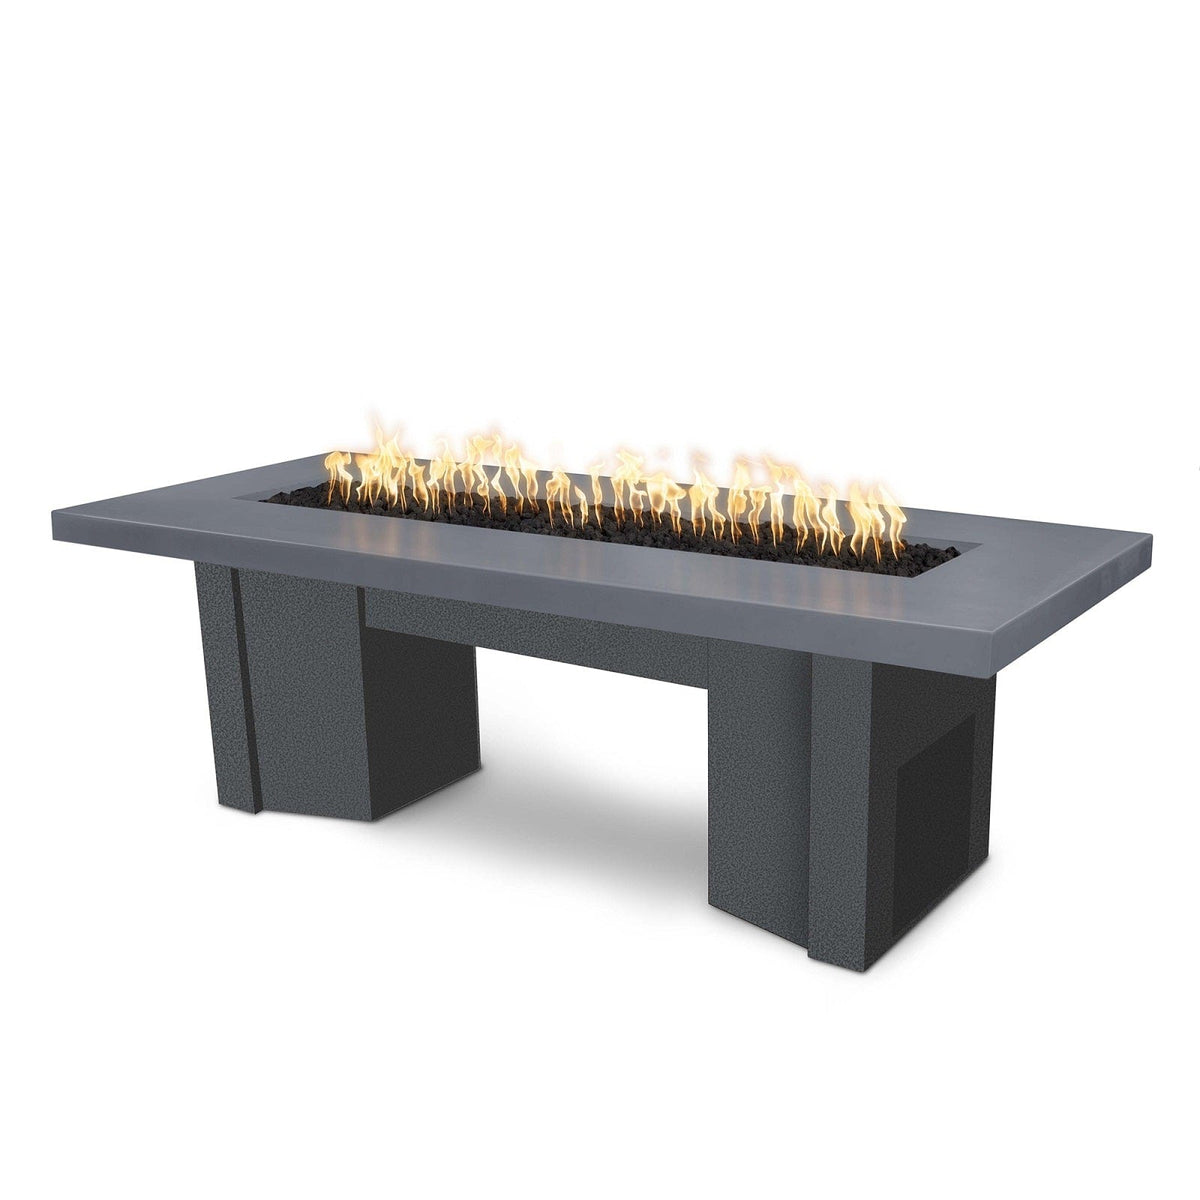 The Outdoor Plus Fire Features Gray (-GRY) / Silver Vein Powder Coated Steel (-SLV) The Outdoor Plus 60&quot; Alameda Fire Table Smooth Concrete in Natural Gas - Match Lit with Flame Sense System / OPT-ALMGFRC60FSML-NG